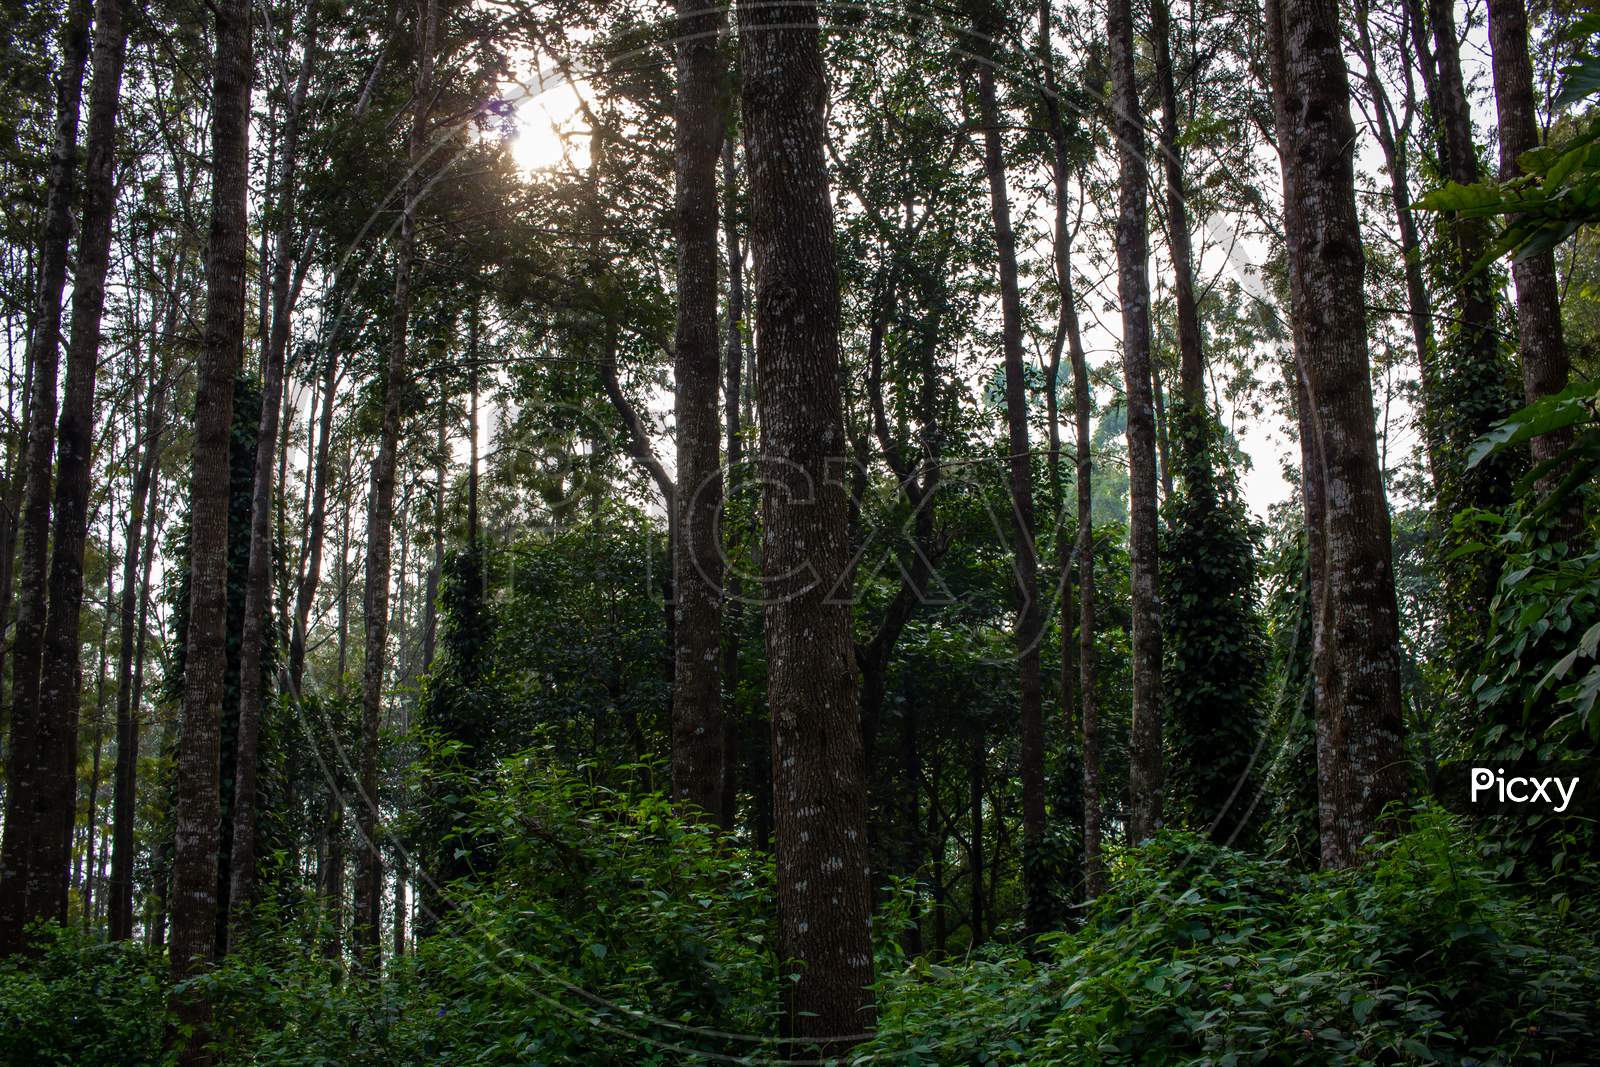 Scenic View Of The Trees Providing Shade To Coffee Plantations In Yercaud Hill Station, Tamil Nadu, India